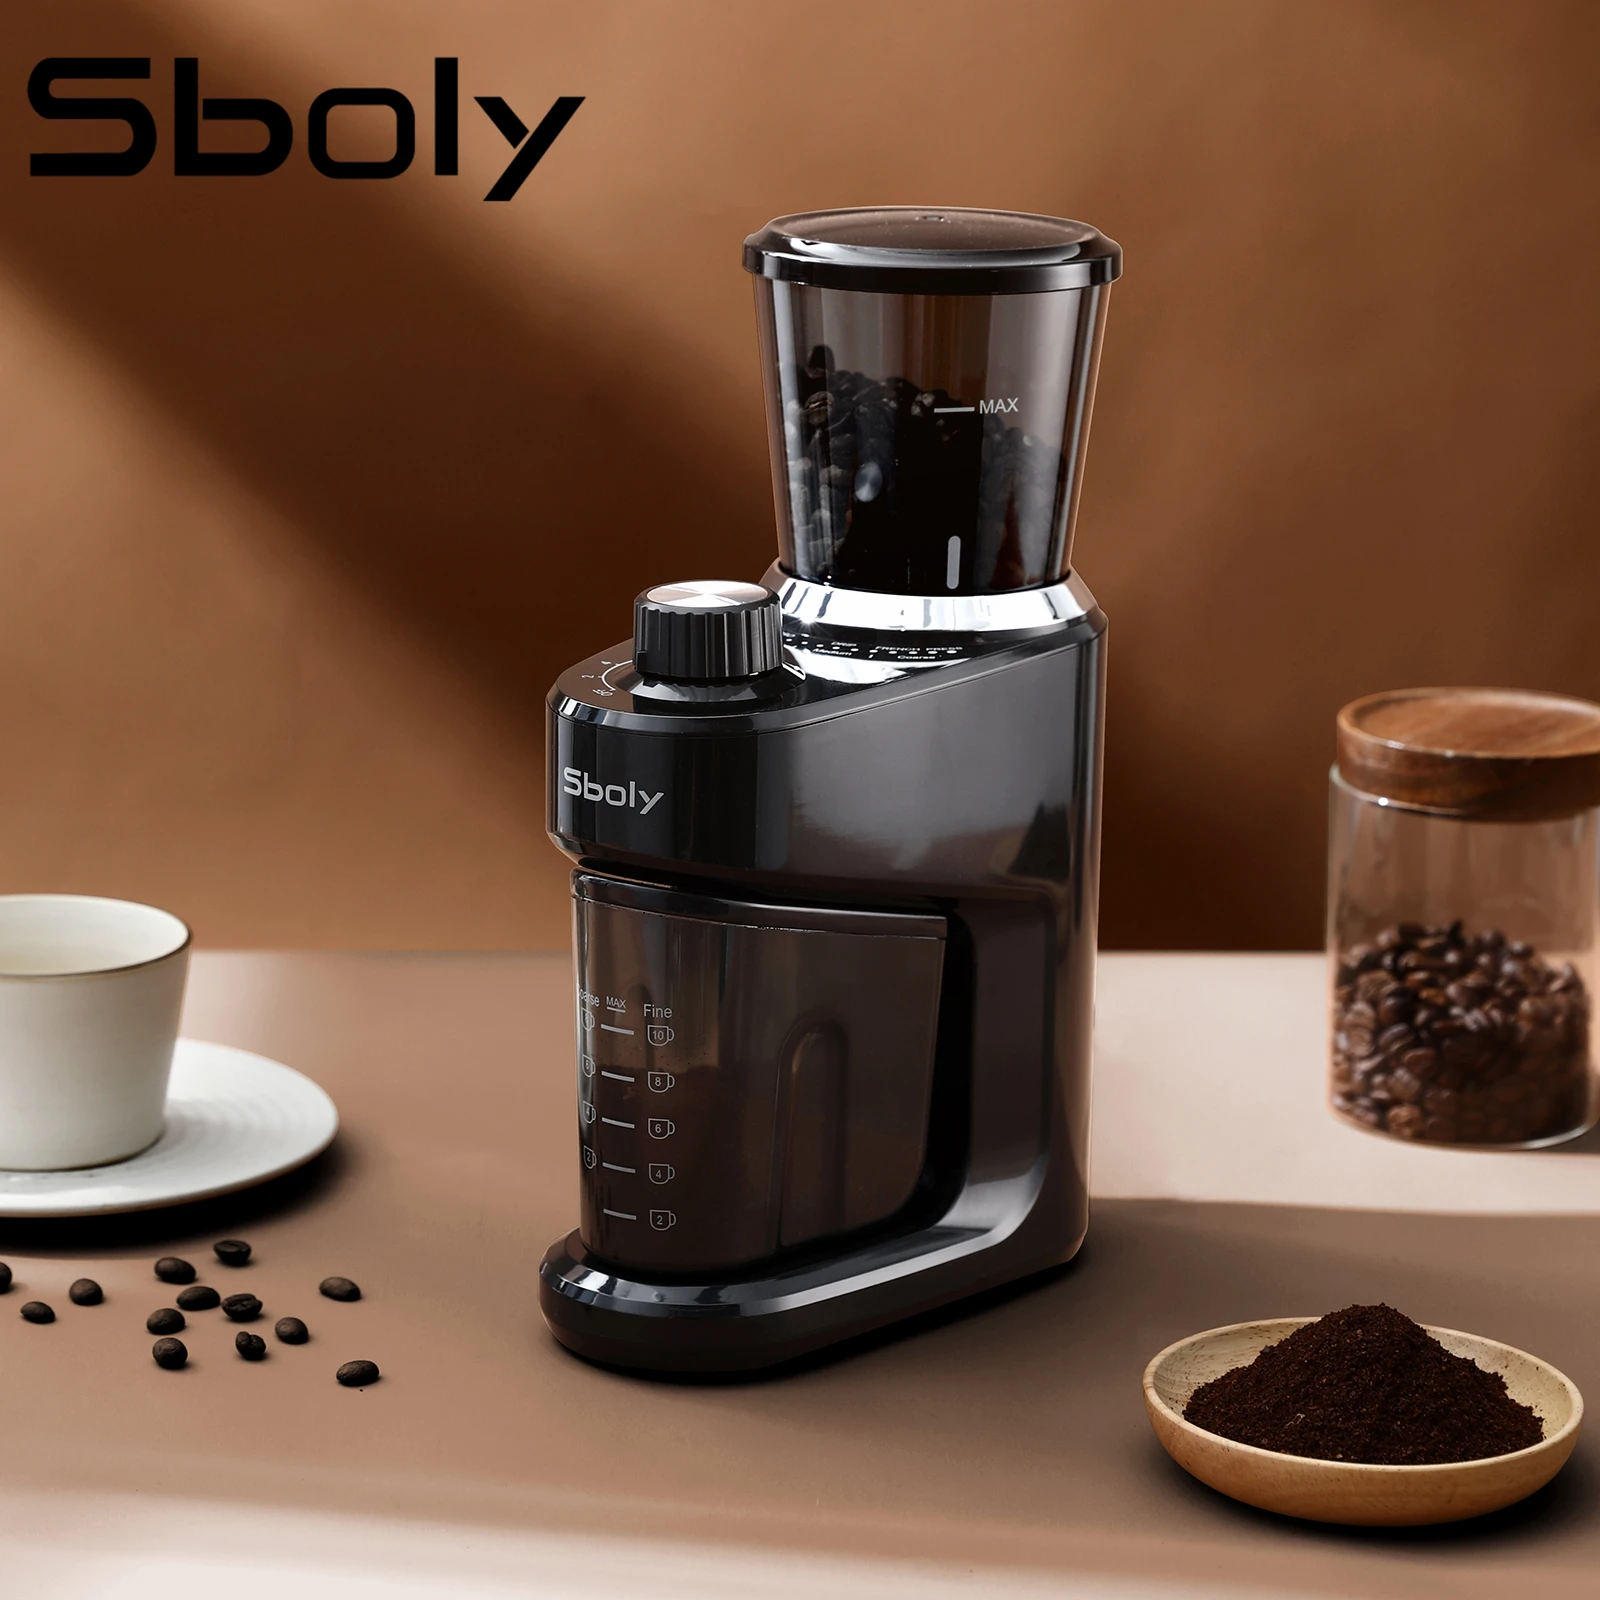 Enlarge Sloby Original Brand Professional 15 Grind Settings Conical Burr Coffee Grinder Grinds For Espresso to Coarse For French Press